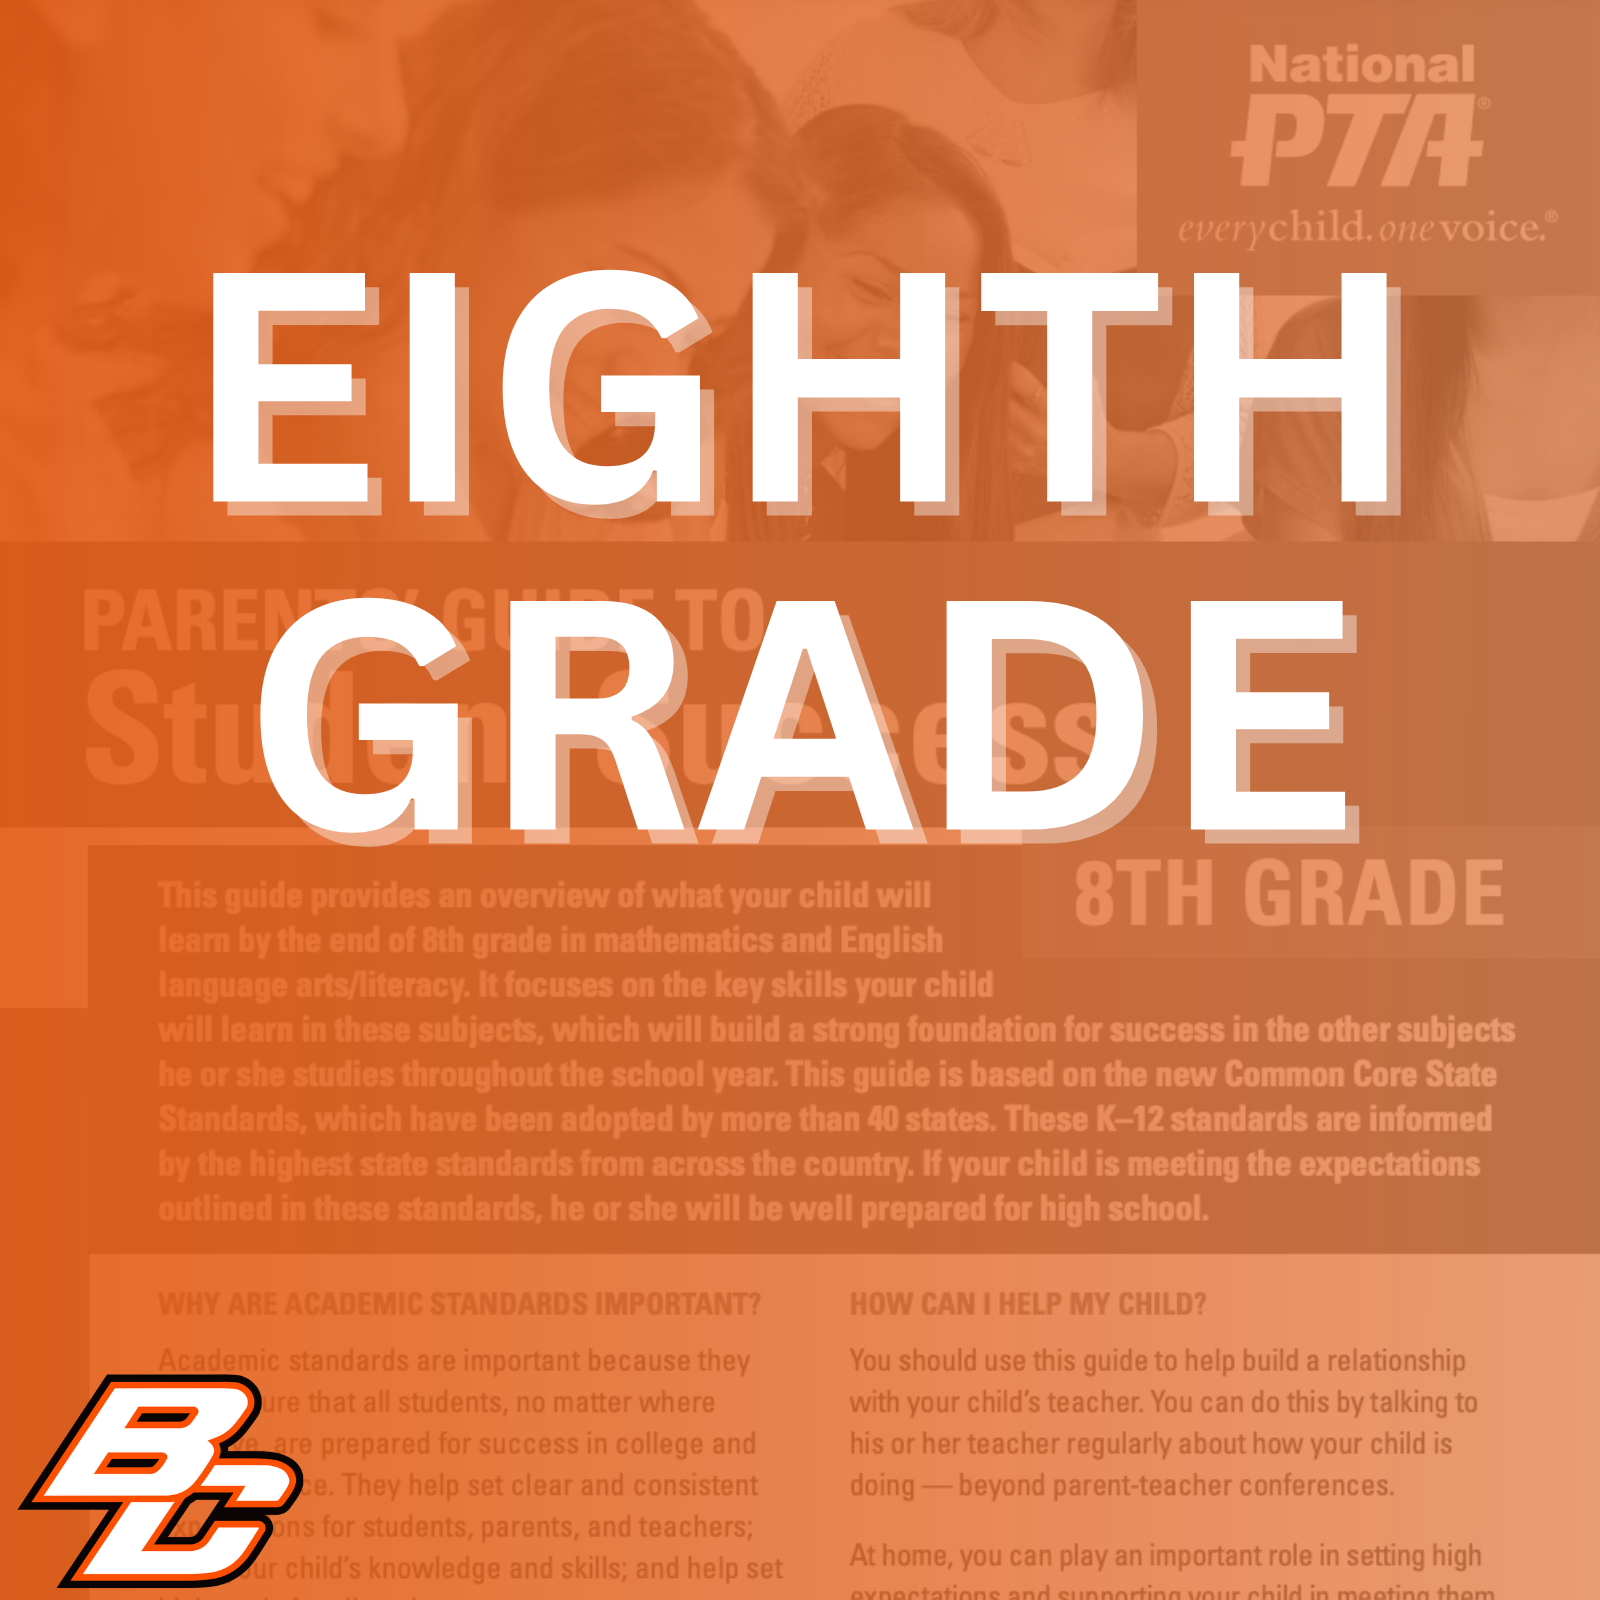 Parent’s Guide to Student Success for 8th grade: This guide provides an overview of what your child will learn by the end of 8th grade in mathematics and English language arts/literacy. It focuses on the key skills your child will learn in these subjects, which will build a strong foundation for success in the other subjects he or she studies throughout the school year. This guide is based on the new Common Core State Standards, which have been adopted by more than 40 states. These K-12 standards are informed by the highest state standards from across the country. If your child is meeting the expectations outlined in these standards, he or she will be well prepared for high school.  Why are academic standards important? Academic standards are important because they help ensure that all students, no matter where they live, are prepared for success in college and the workforce. They help set clear and consistent expectations for students, parents, and teachers; build your child's knowledge and skills; and help set high goals for all students.  Of course, high standards are not the only thing needed for our children's success. But standards provide an important first step - a clear roadmap for learning for teachers, parents, and students. Having clearly defined goals helps families and teachers work together to ensure that students succeed. Standards help parents and teachers know when students need extra assistance or when they need to be challenged even more. They also will help your child develop critical thinking skills that will prepare him or her for college and career.  How can I help my child? You should use this guide to help build a relationship with your child's teacher. You can do this by talking to his or her teacher regularly about how your child is doing - beyond parent-teacher conferences.  At home, you can play an important role in setting high expectations and supporting your child in meeting them. If your child needs a little extra help or wants to learn more about a subject, work with his or her teacher to identify opportunities for tutoring, to get involved in clubs after school, or to find other resources.  This guide includes: An overview of some of the key things your child will learn in English/literacy and math in 8th grade, ideas for activities to help your child learn at home and topics of discussion for talking to your child's teacher about his or her academic progress.